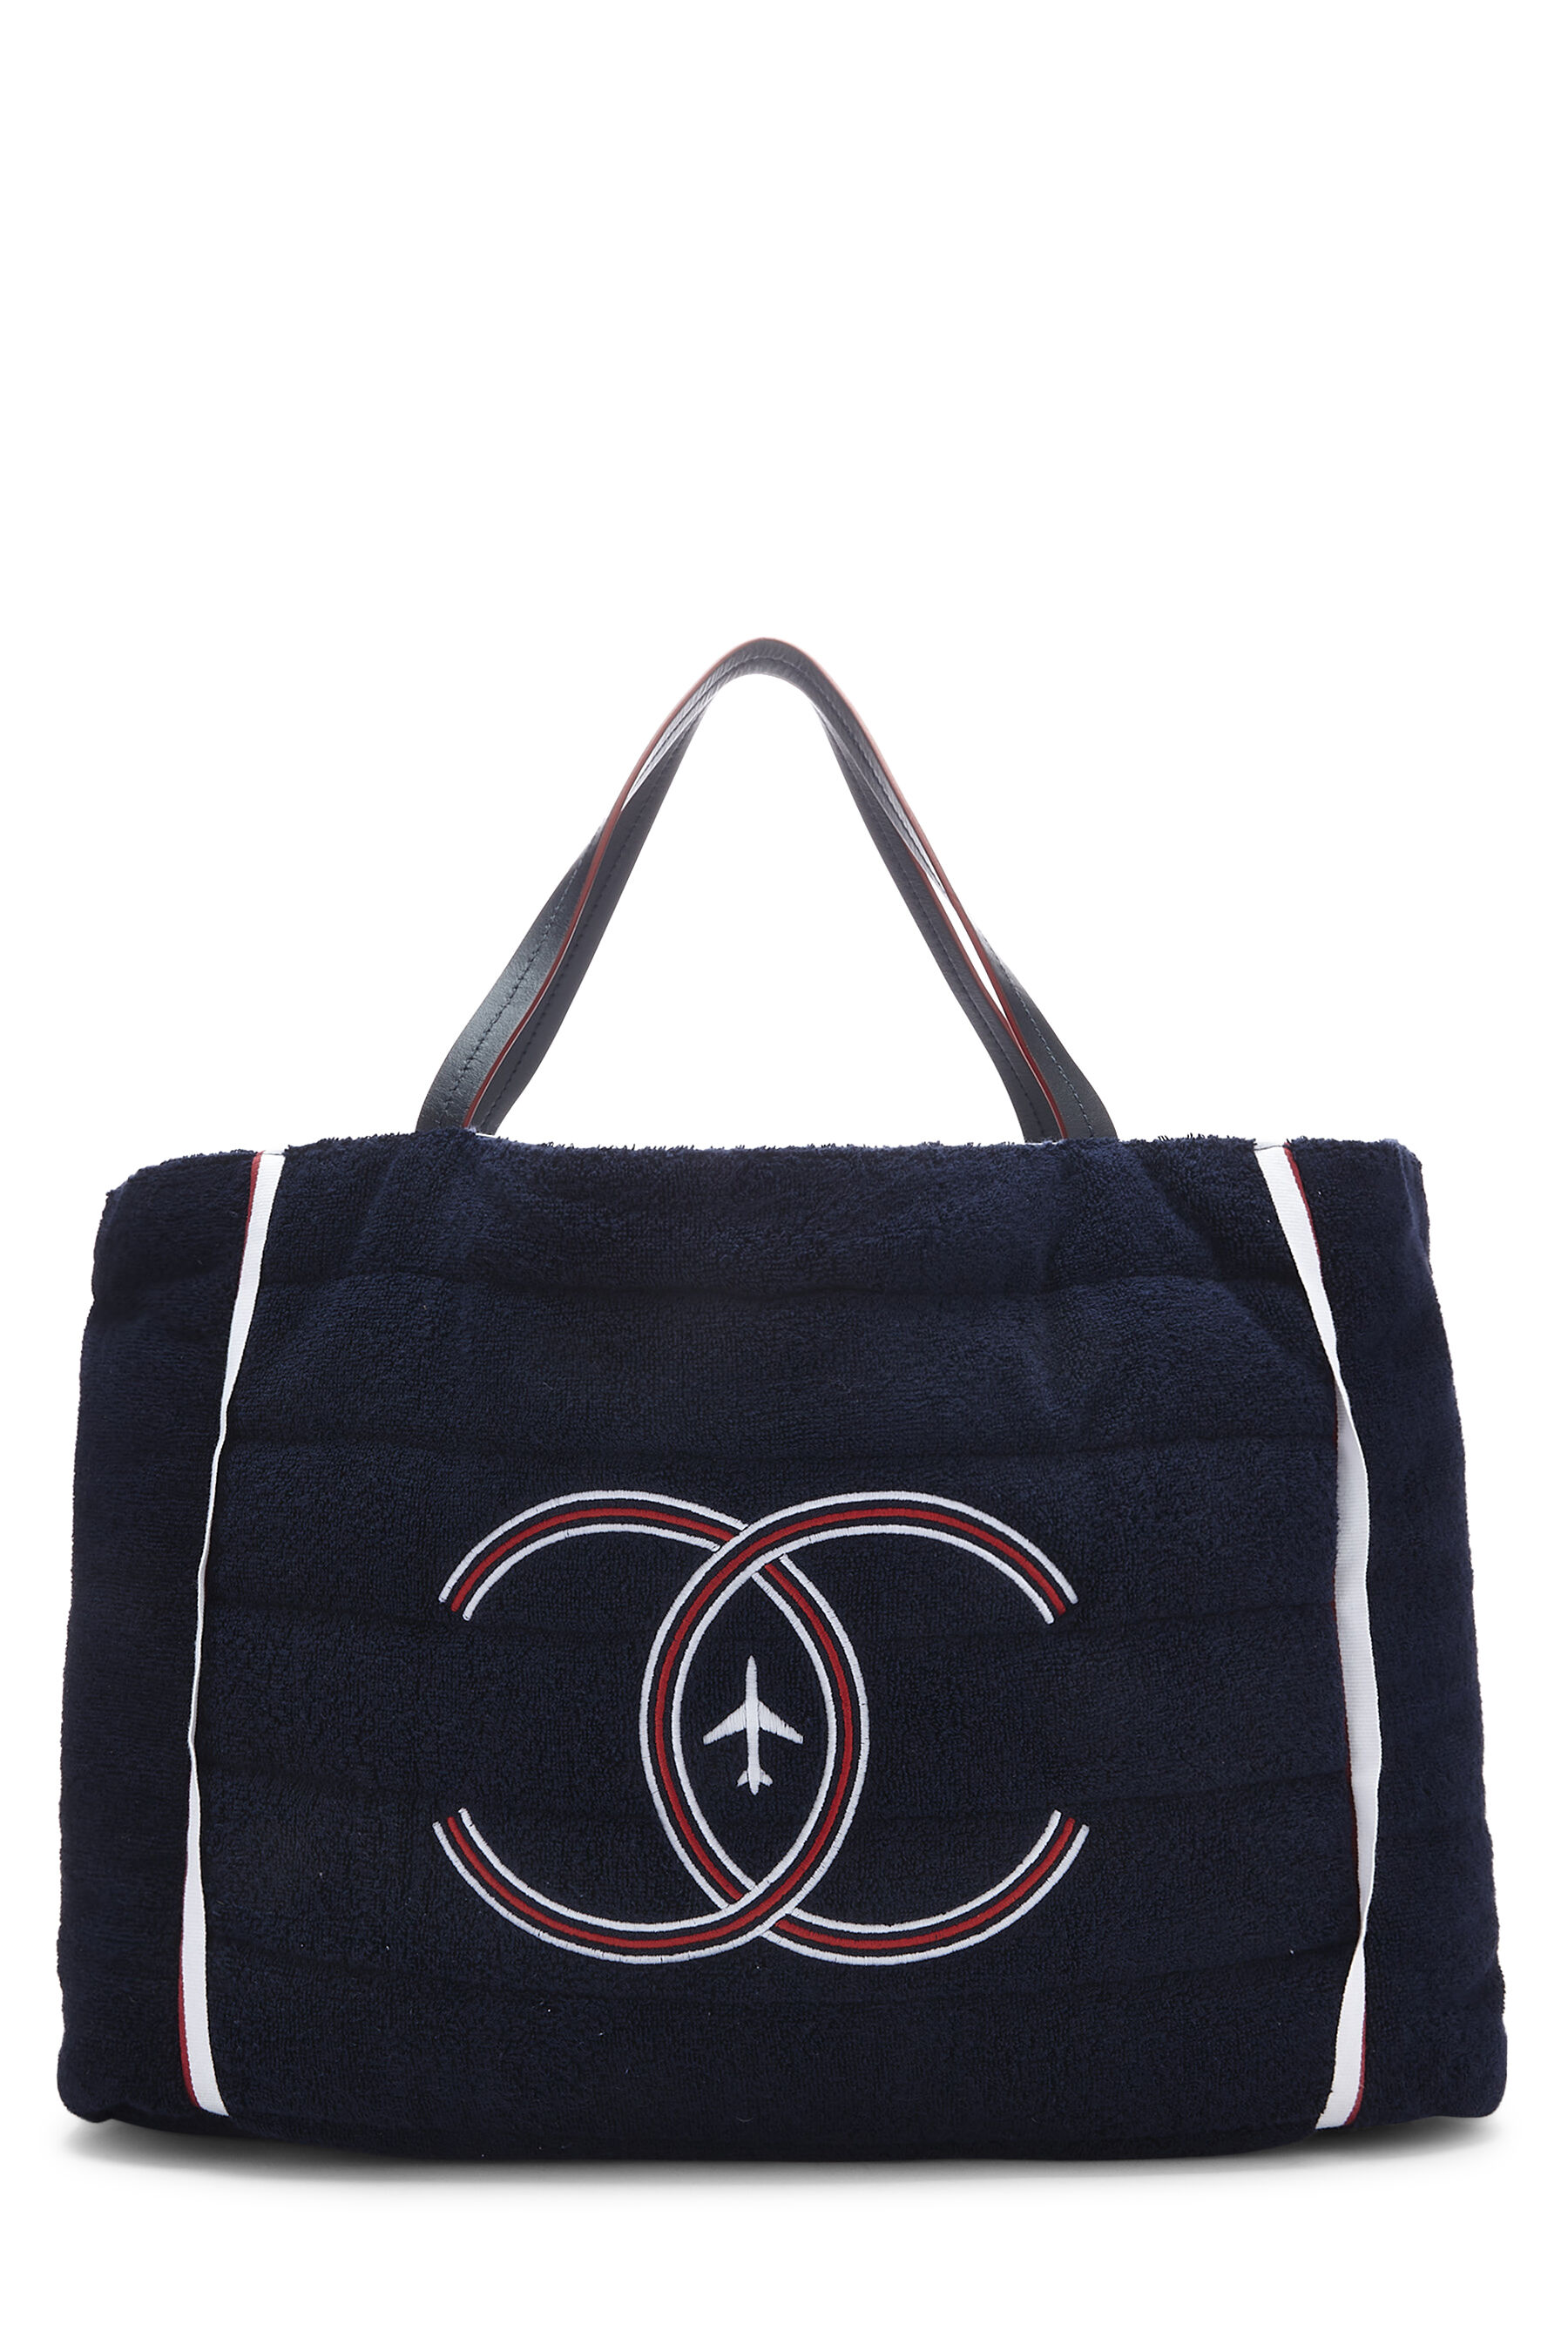 Chanel - Navy Terry Cloth & Silver Nylon Reversible Airlines Tote Large